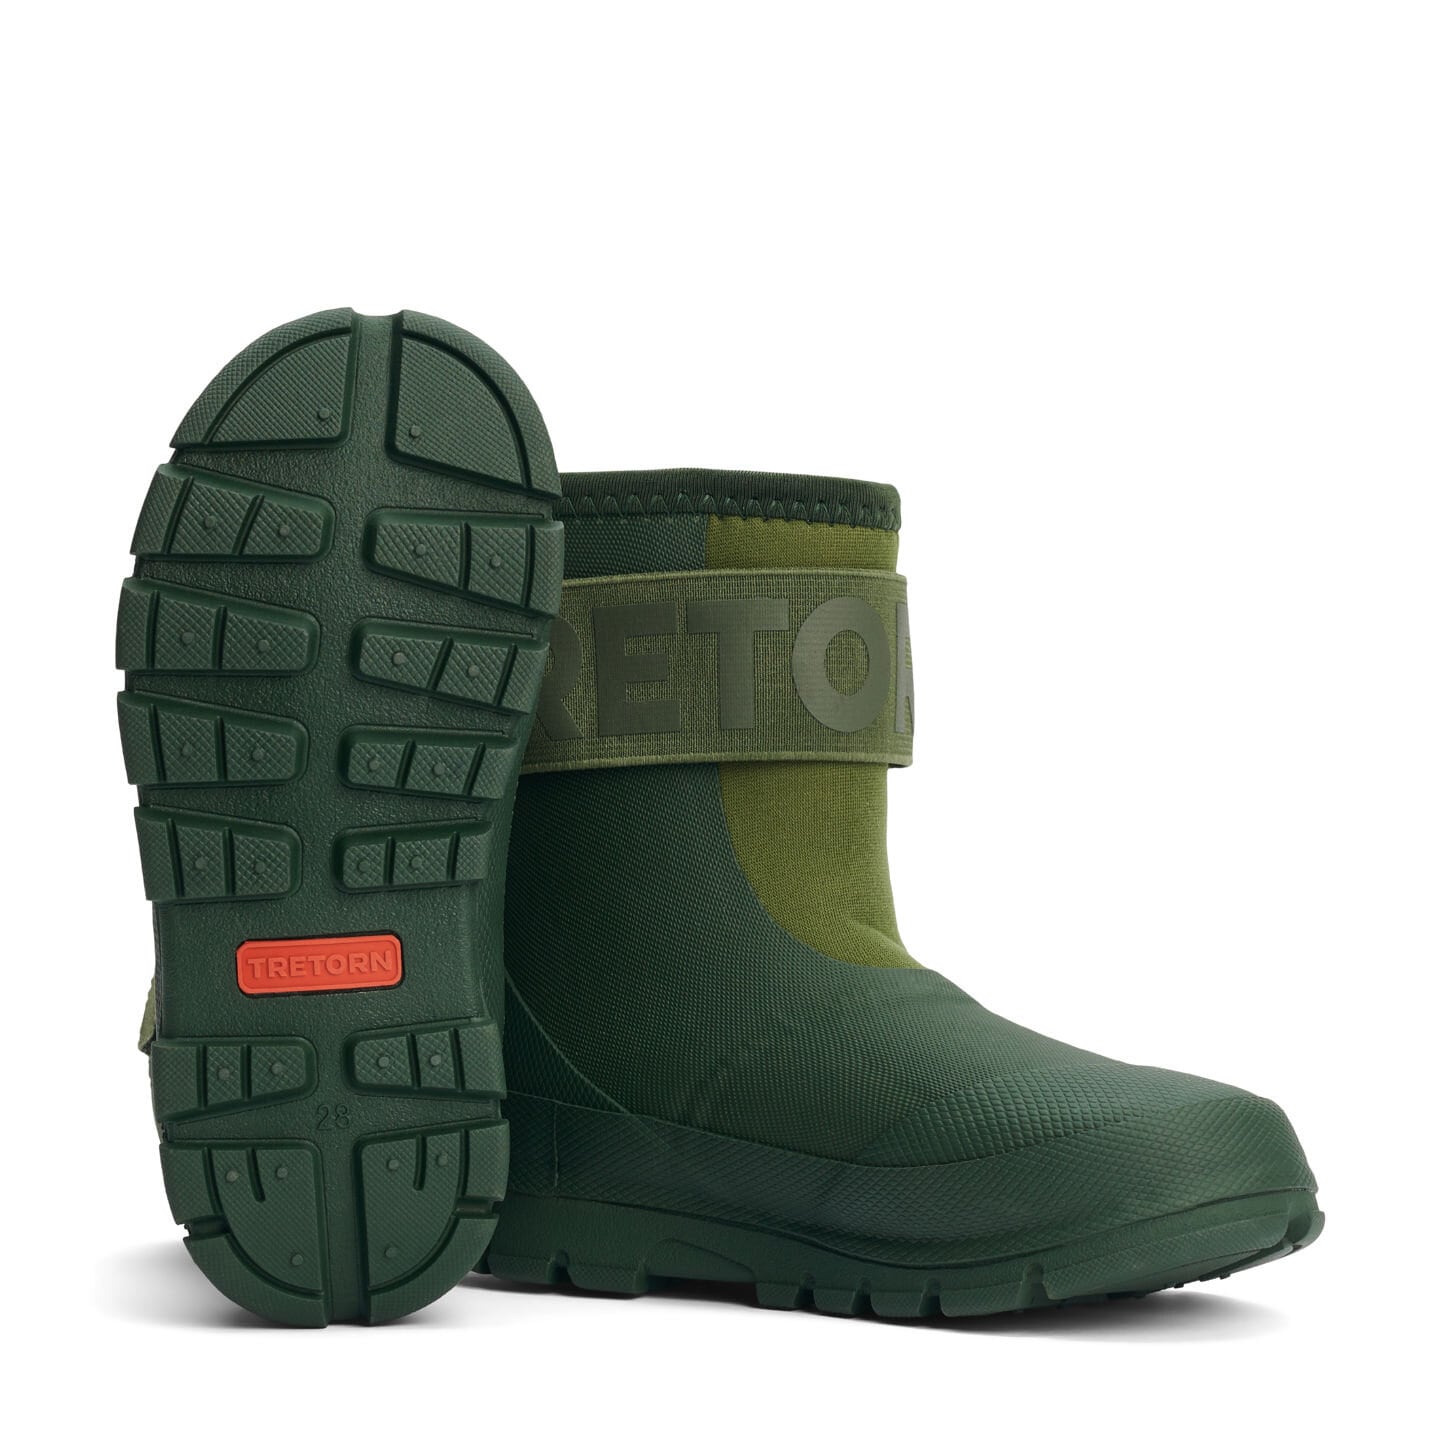 MAG RUBBER BOOT